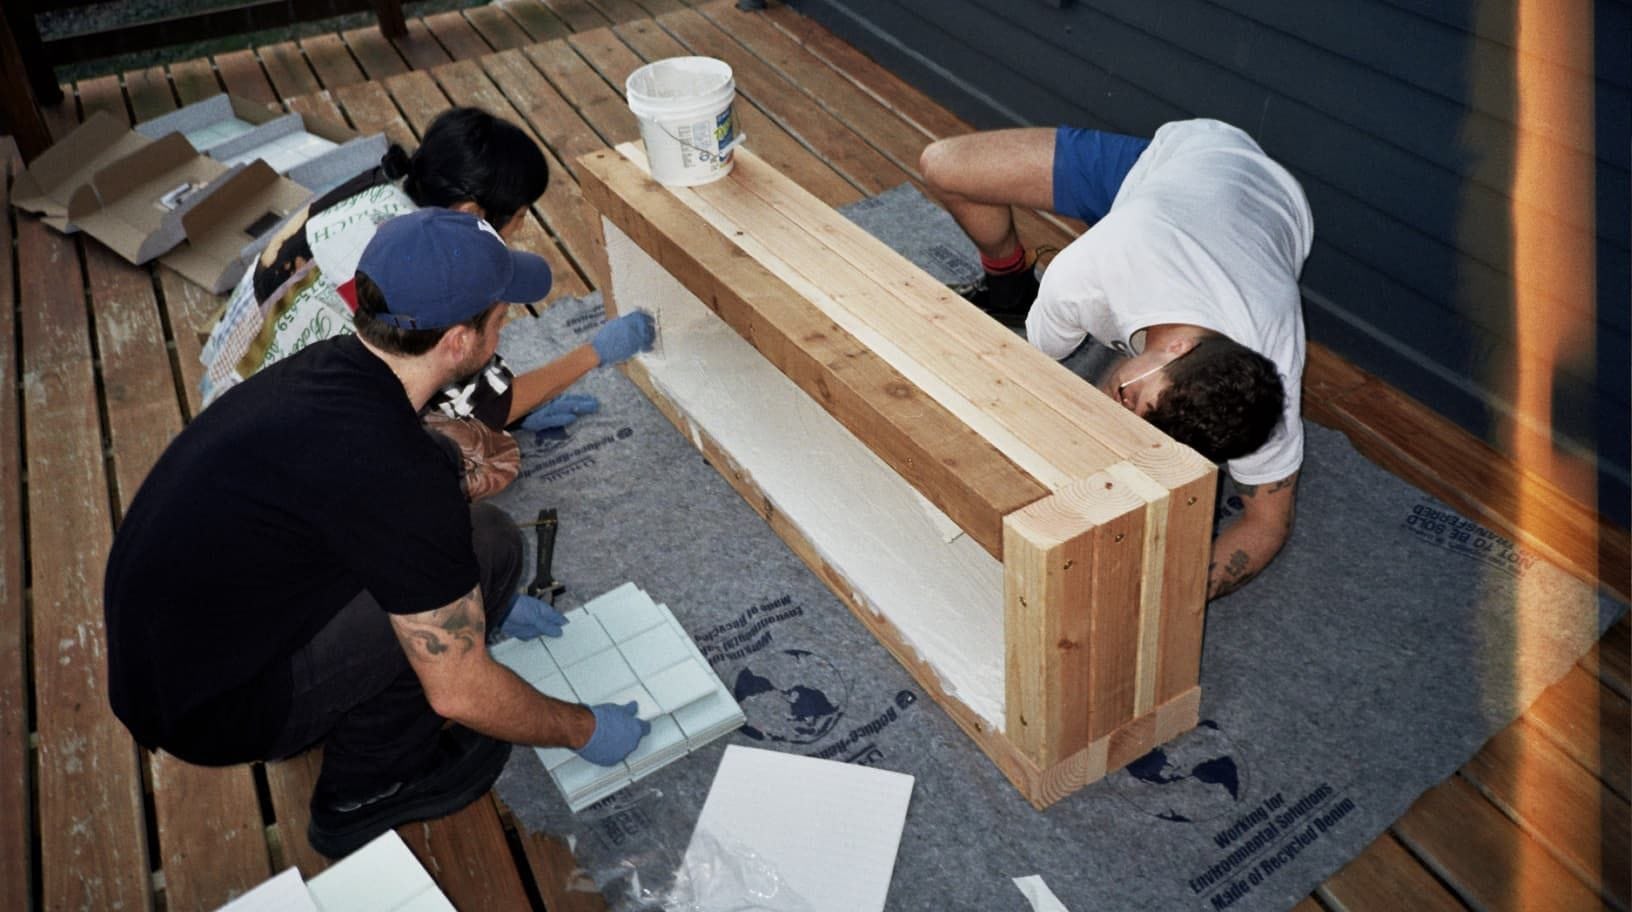 View Source's Annie Chen, Brendan McAuliffe and Andrew Rutledge constructing a bench out of wood and tile